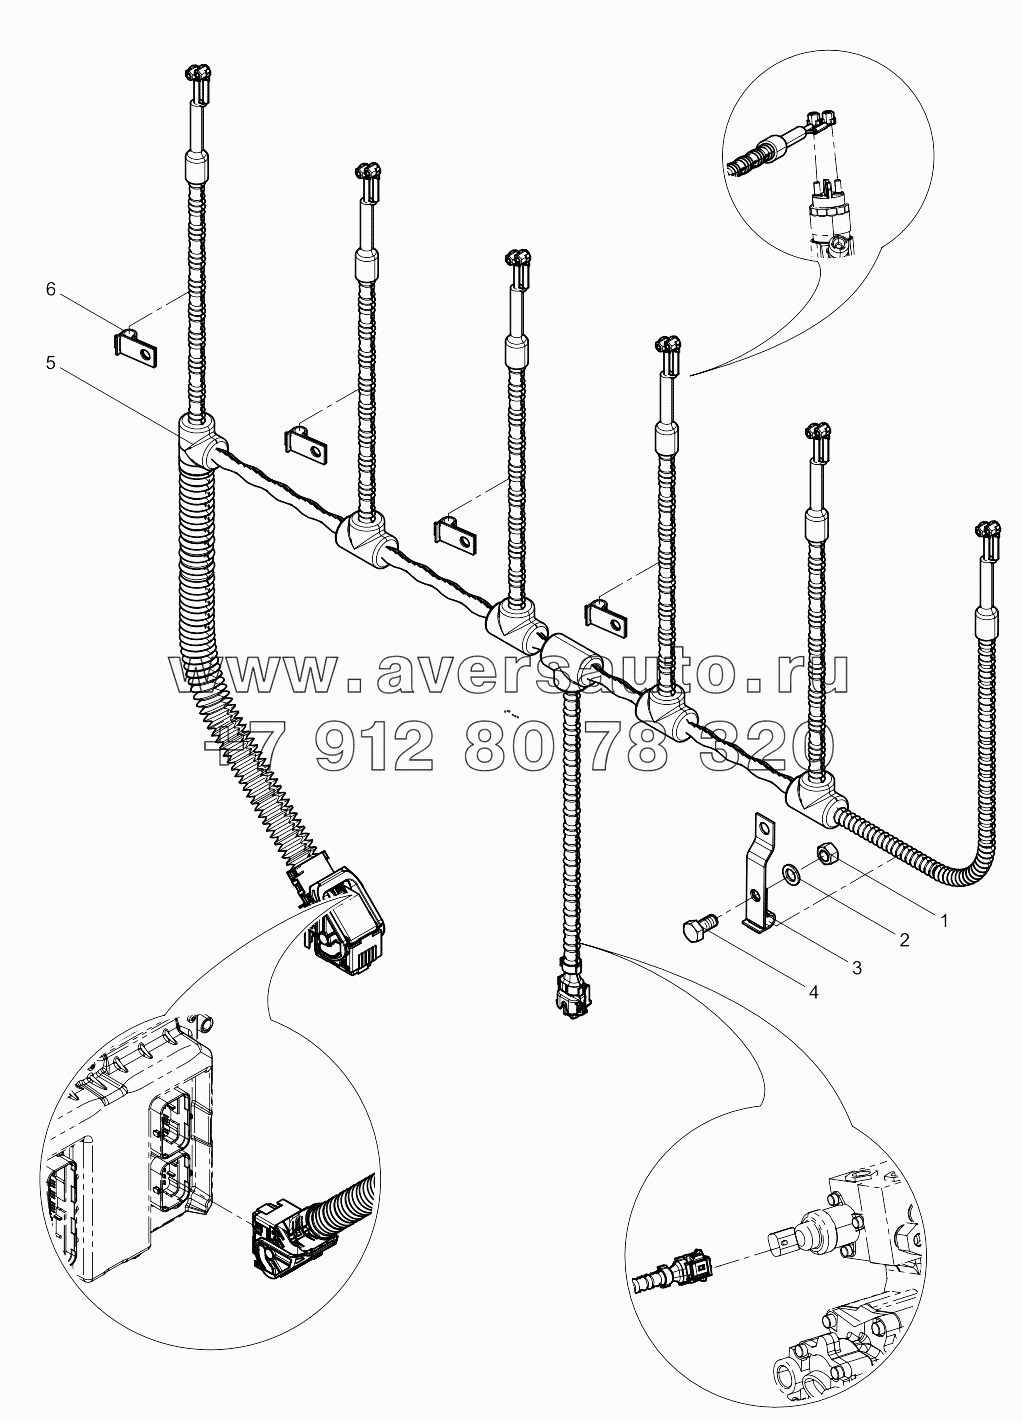  Electronic Control System Harness and Sensor Group